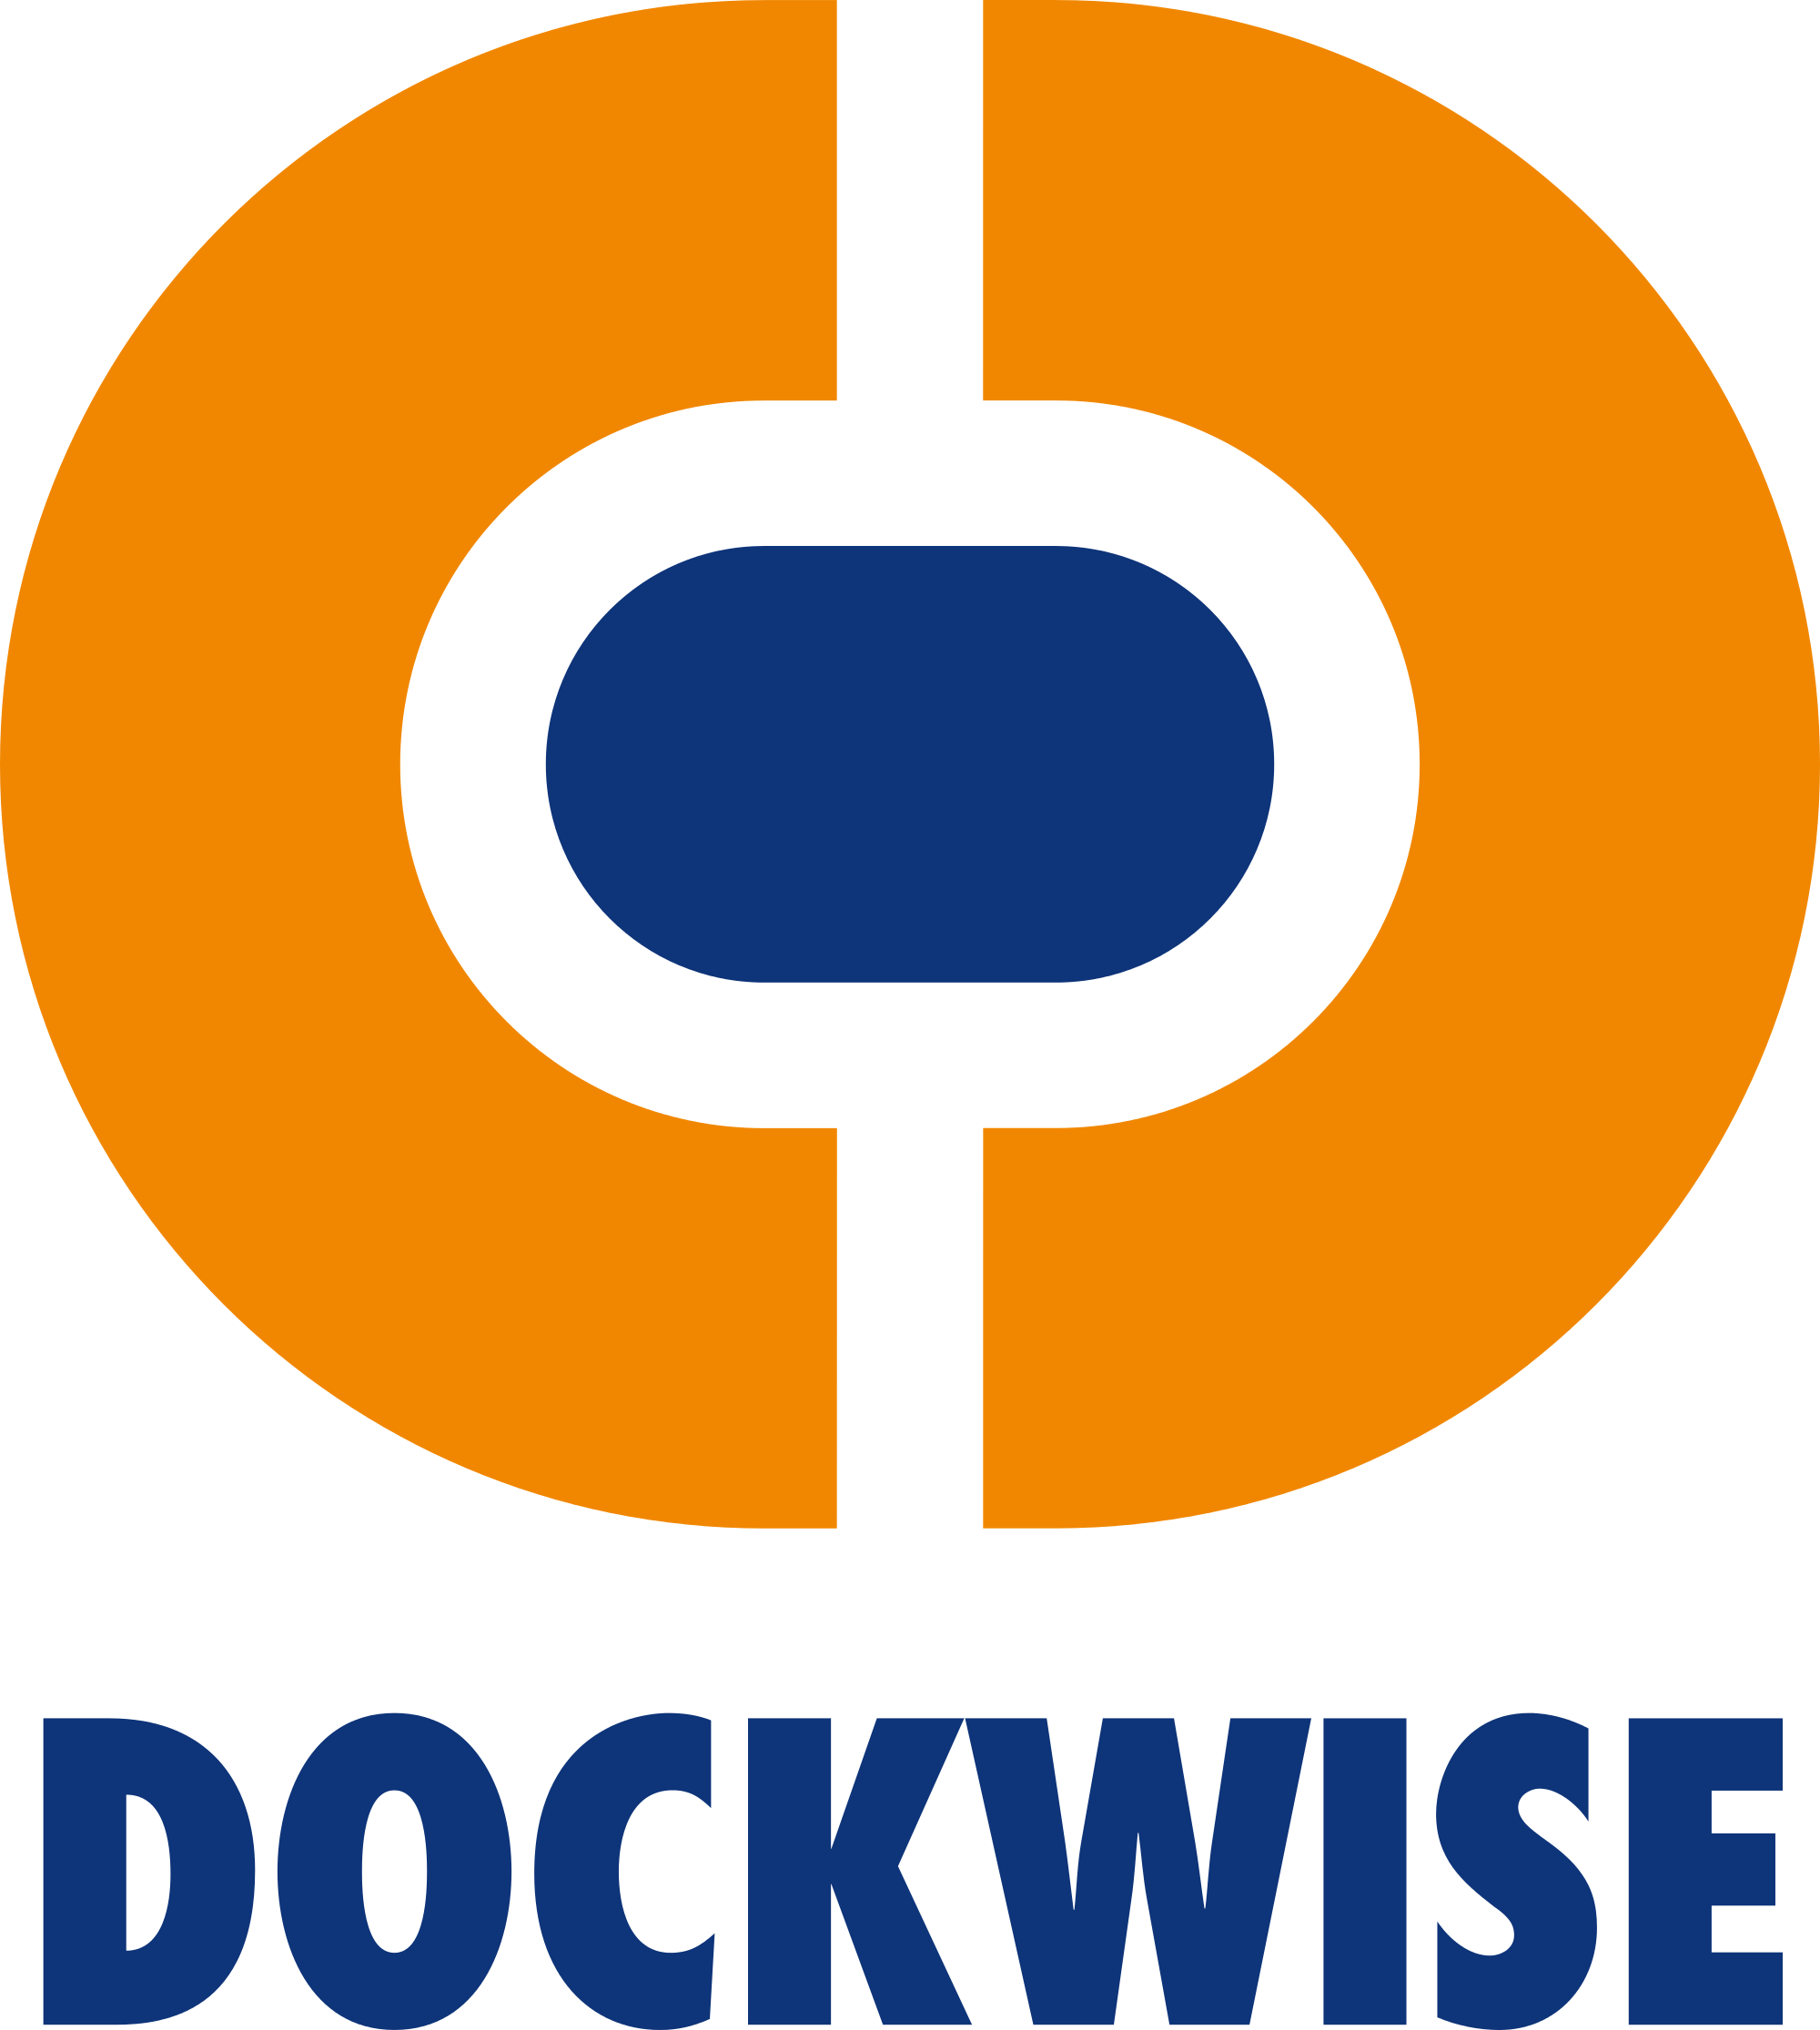 Partners CNGS Engineering — Dockwise (now - a part of Boskalis)